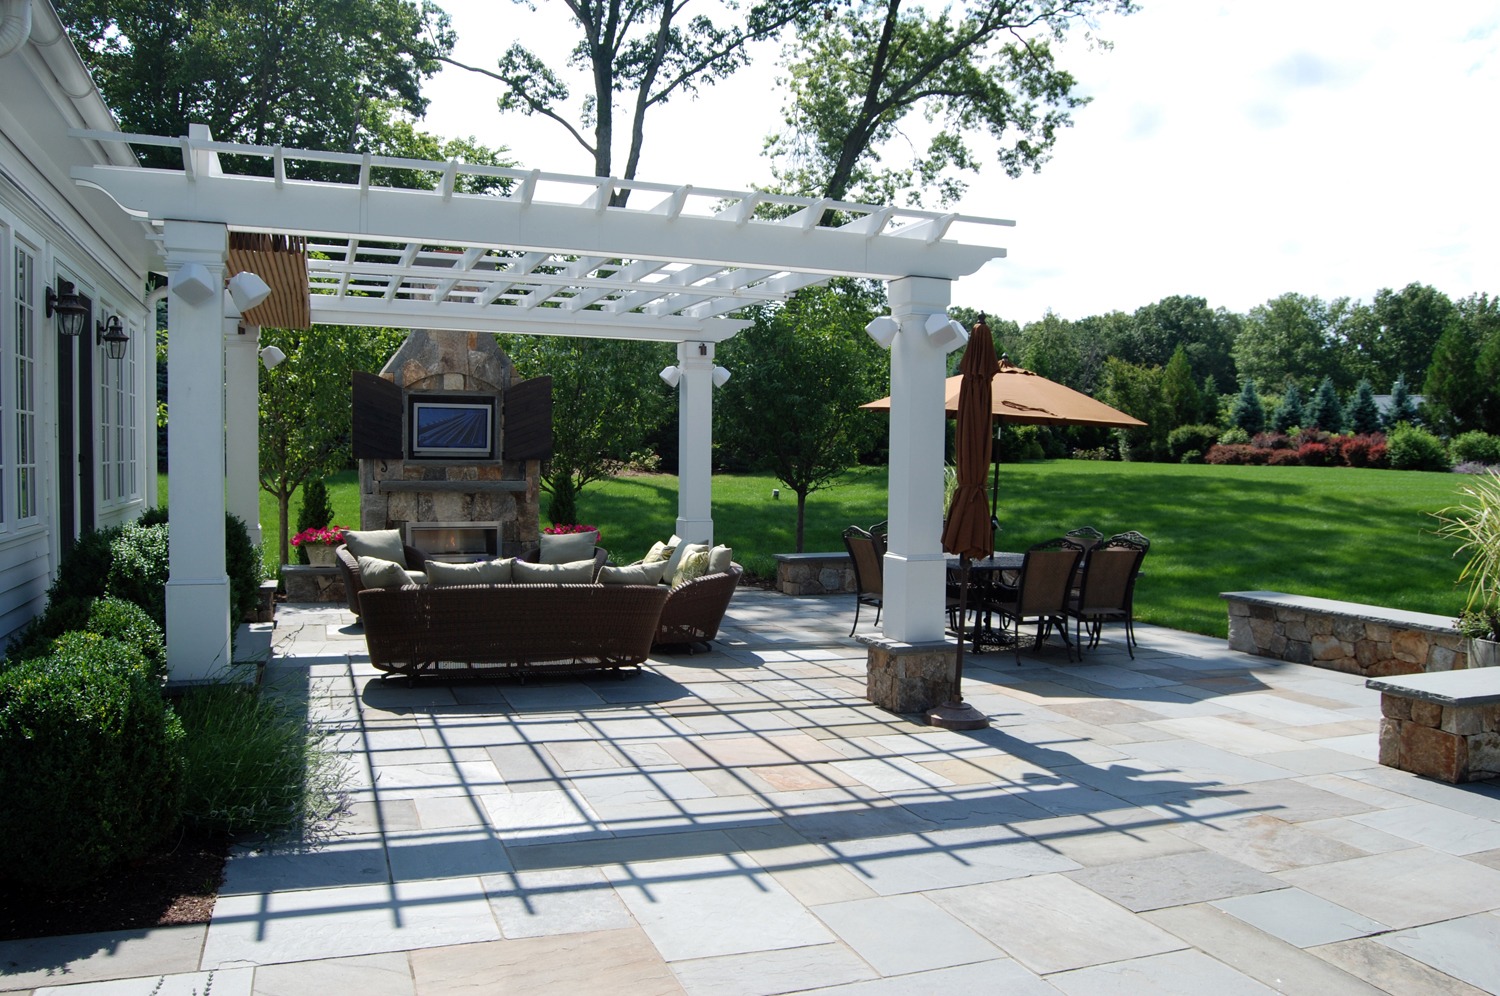 An elegant outdoor patio with a white pergola, stone fireplace, wicker sofa, dining set, and an umbrella, surrounded by lush greenery under a clear sky.